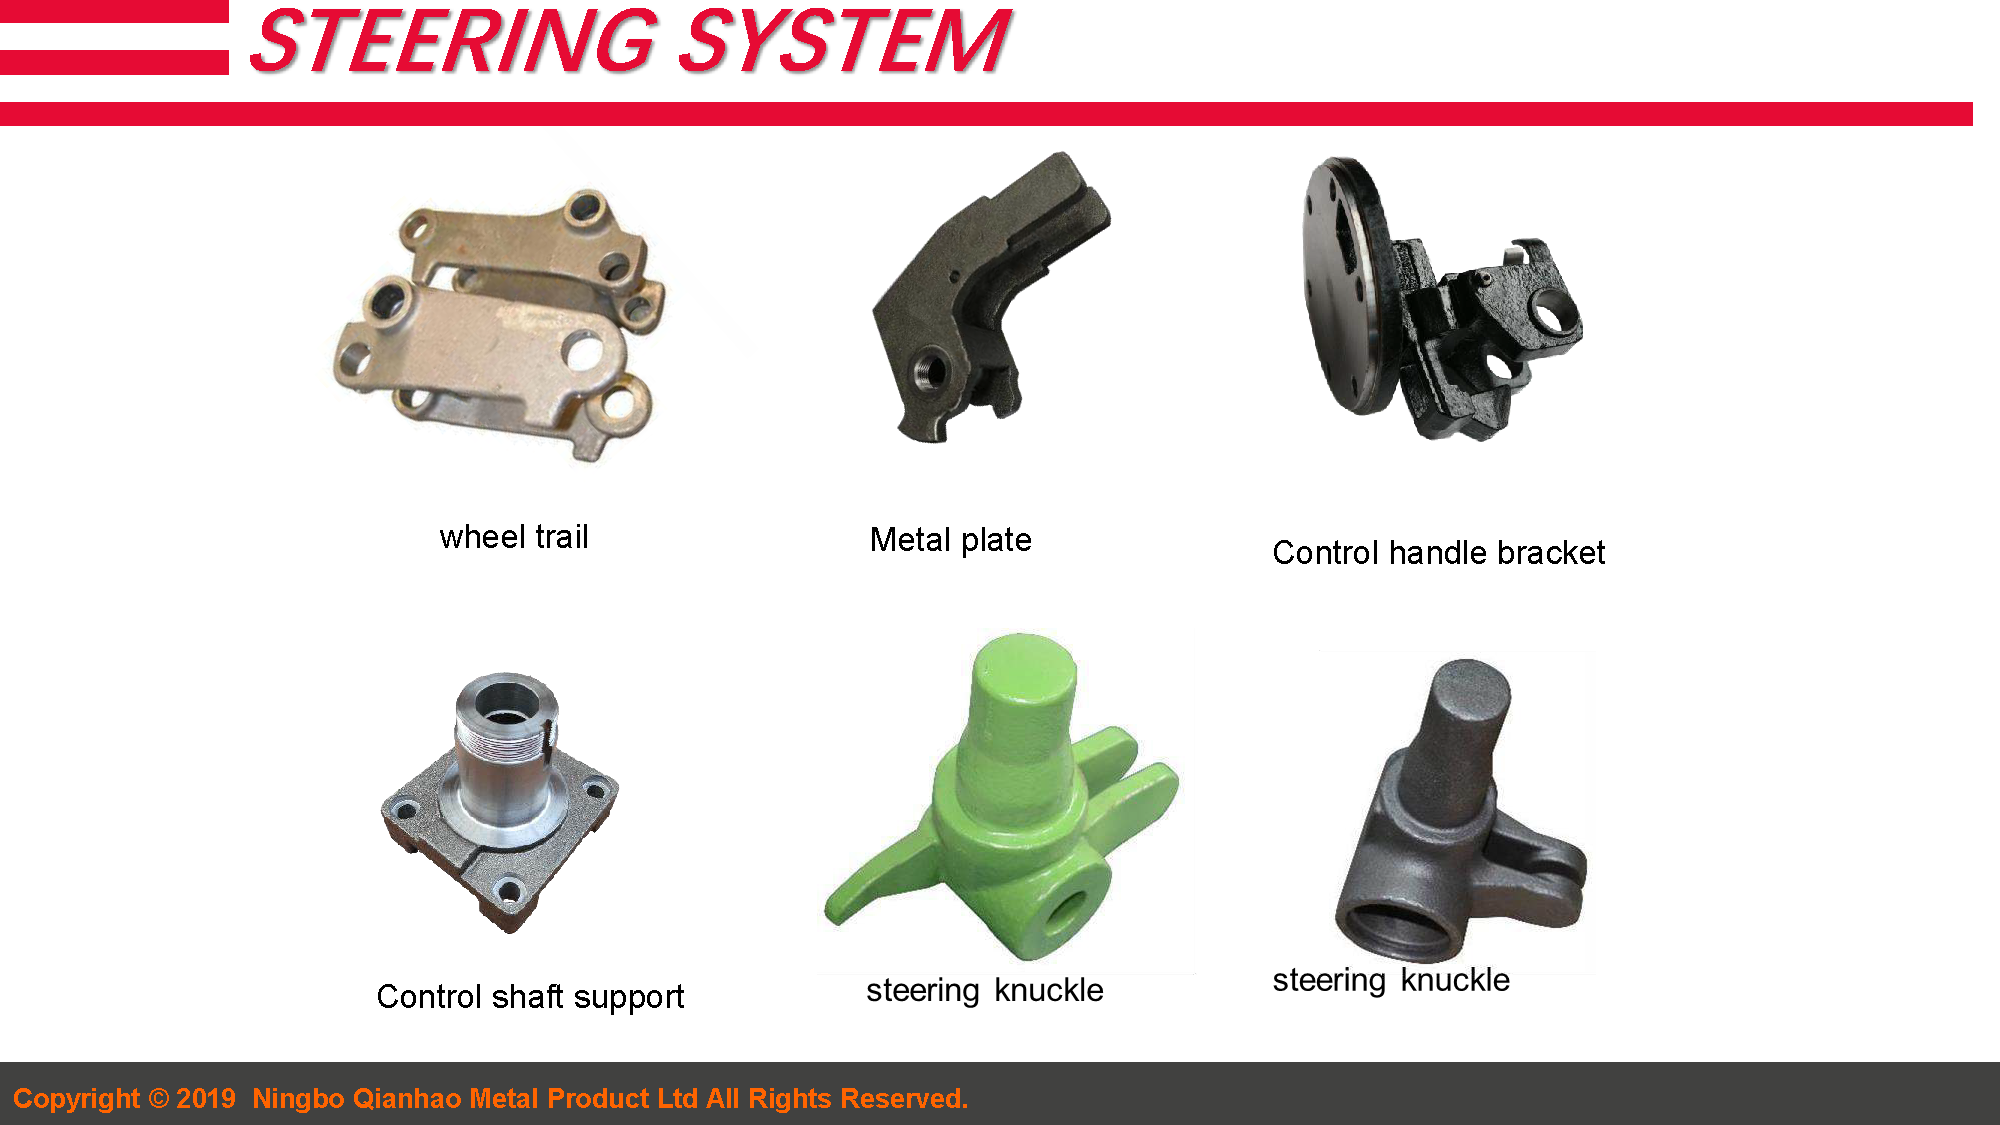 2.Forklift Components Capacity Introduction 19.4.9(图16)